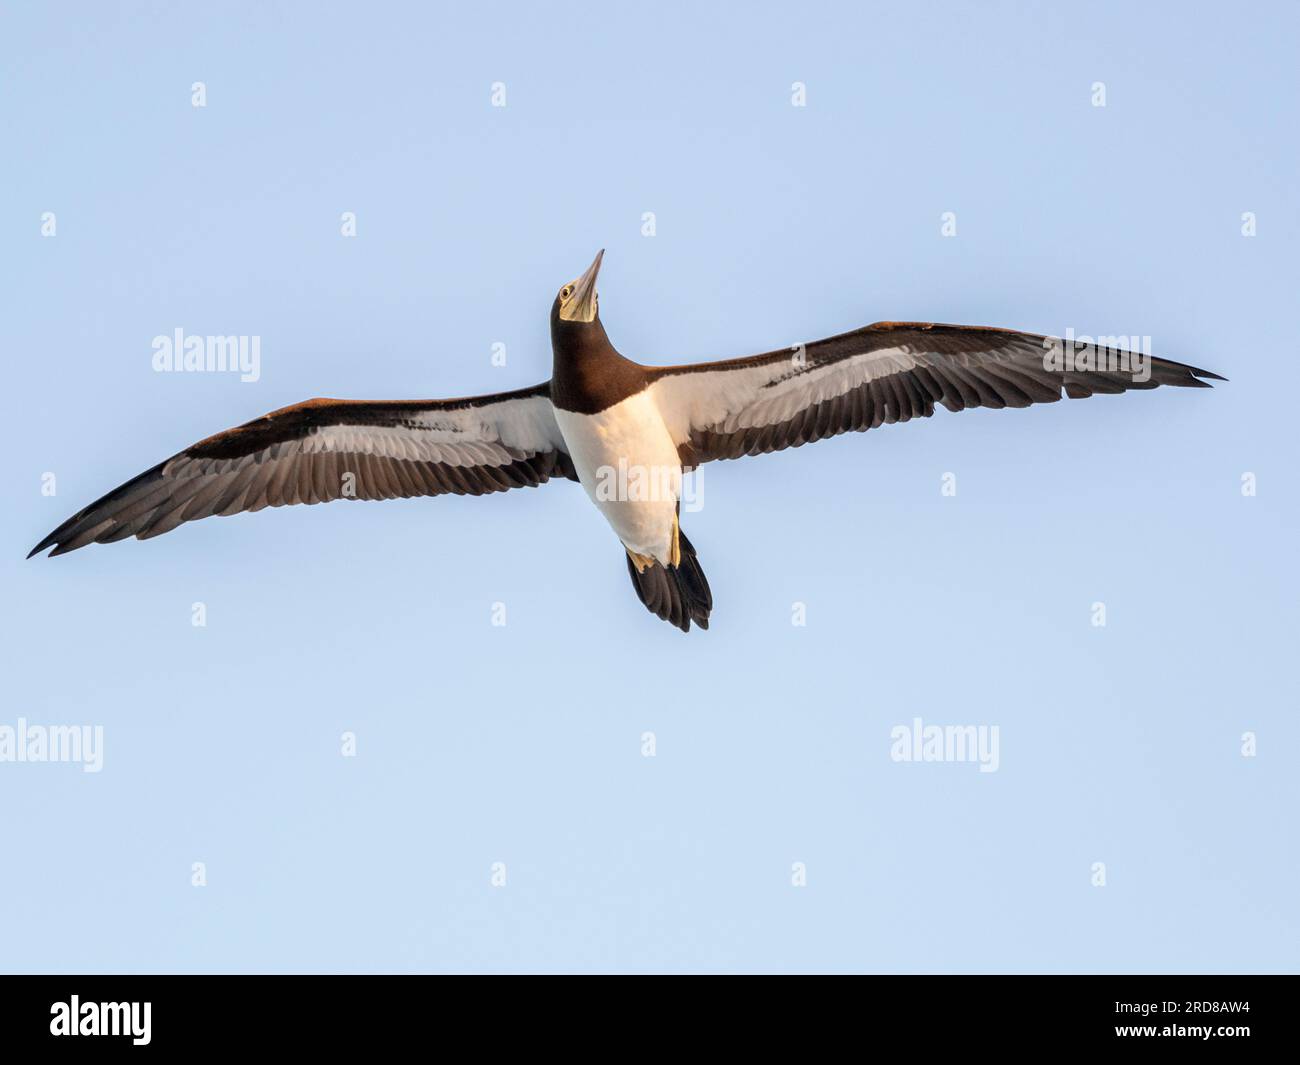 An adult brown booby (Sula leucogaster) in flight, near Coiba Island, Panama, Central America Stock Photo